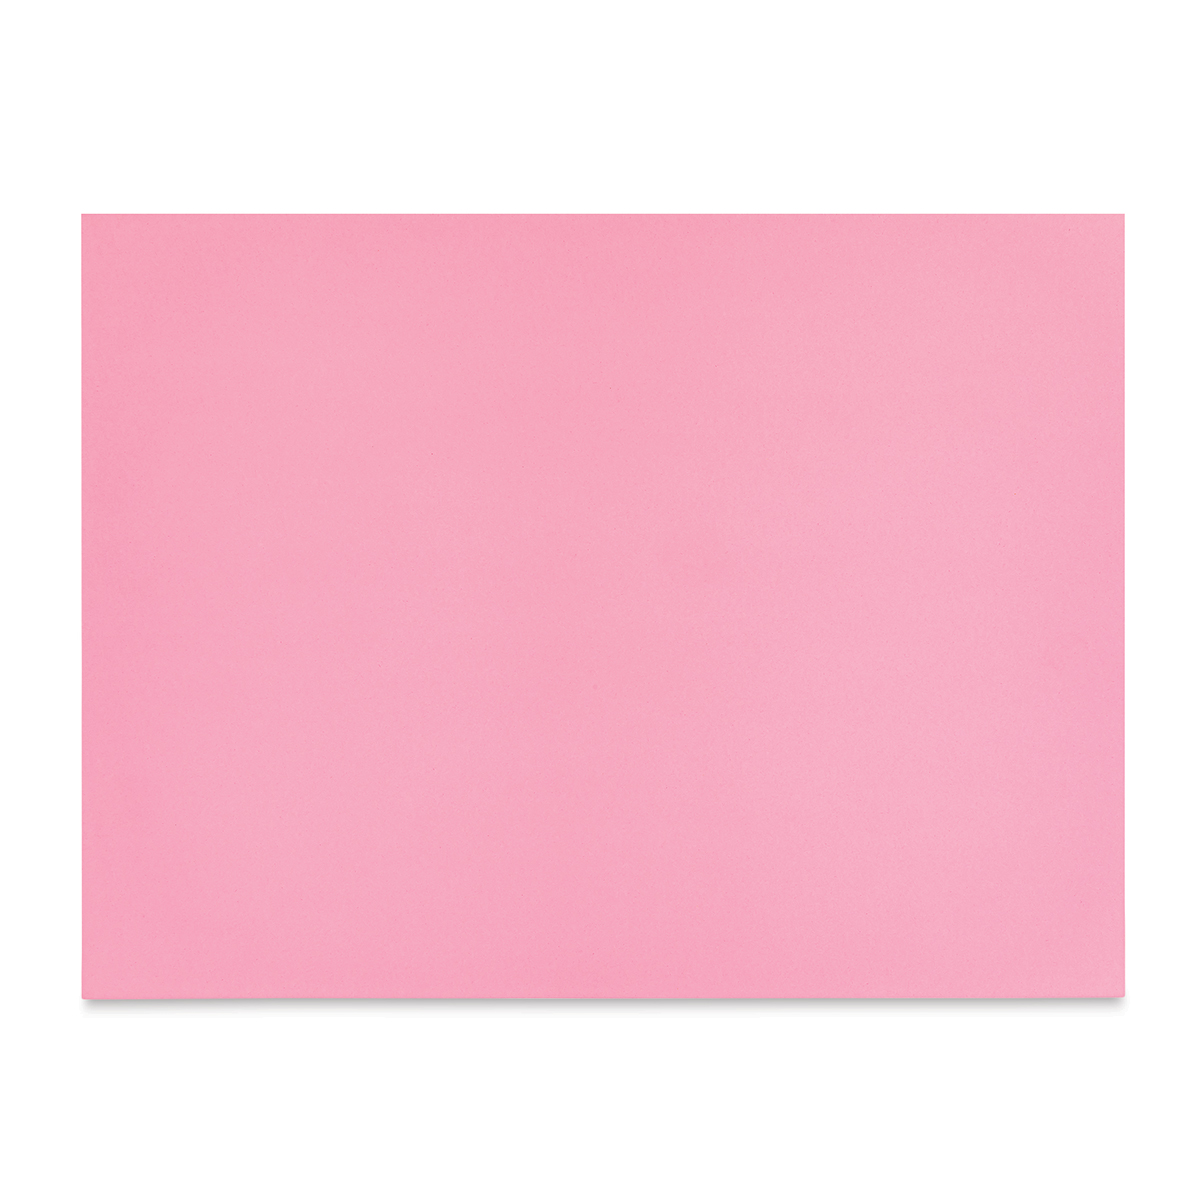 Pacon Tru-Ray Construction Paper, 76lb, 12 x 18, Pink, 50/Pack